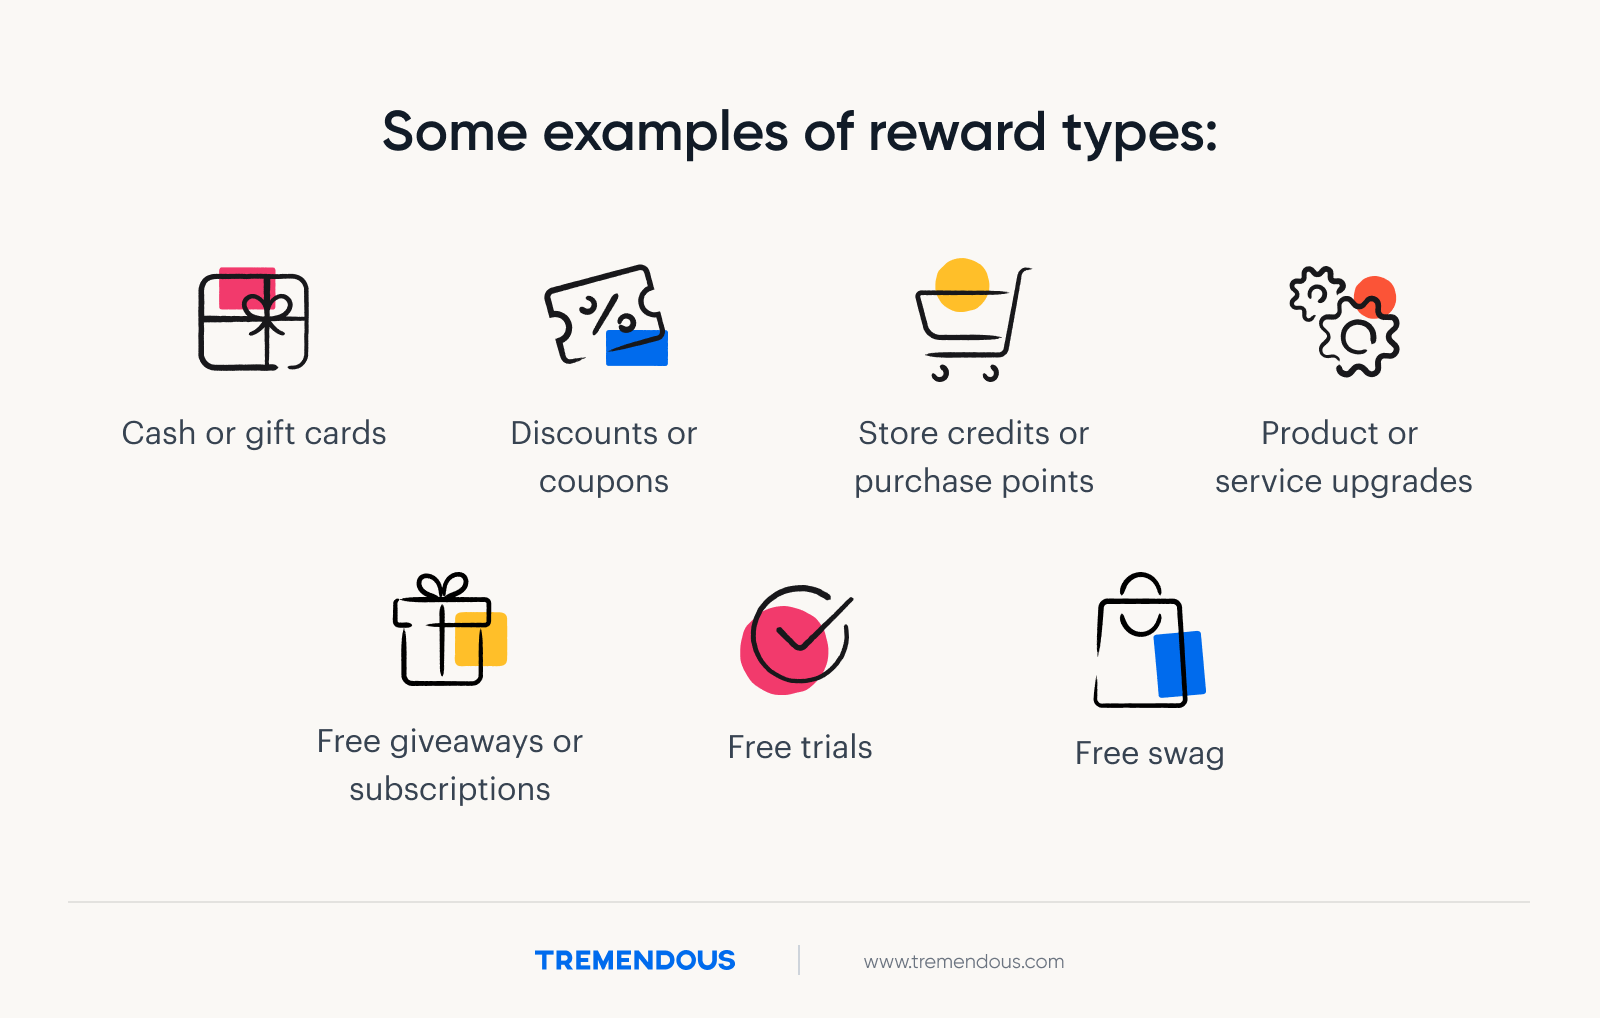 Examples of reward types, including: cash or gift cards, discounts or coupons, store credit or purchase points, product or service upgrades, free giveaways, free trials, and free swag.